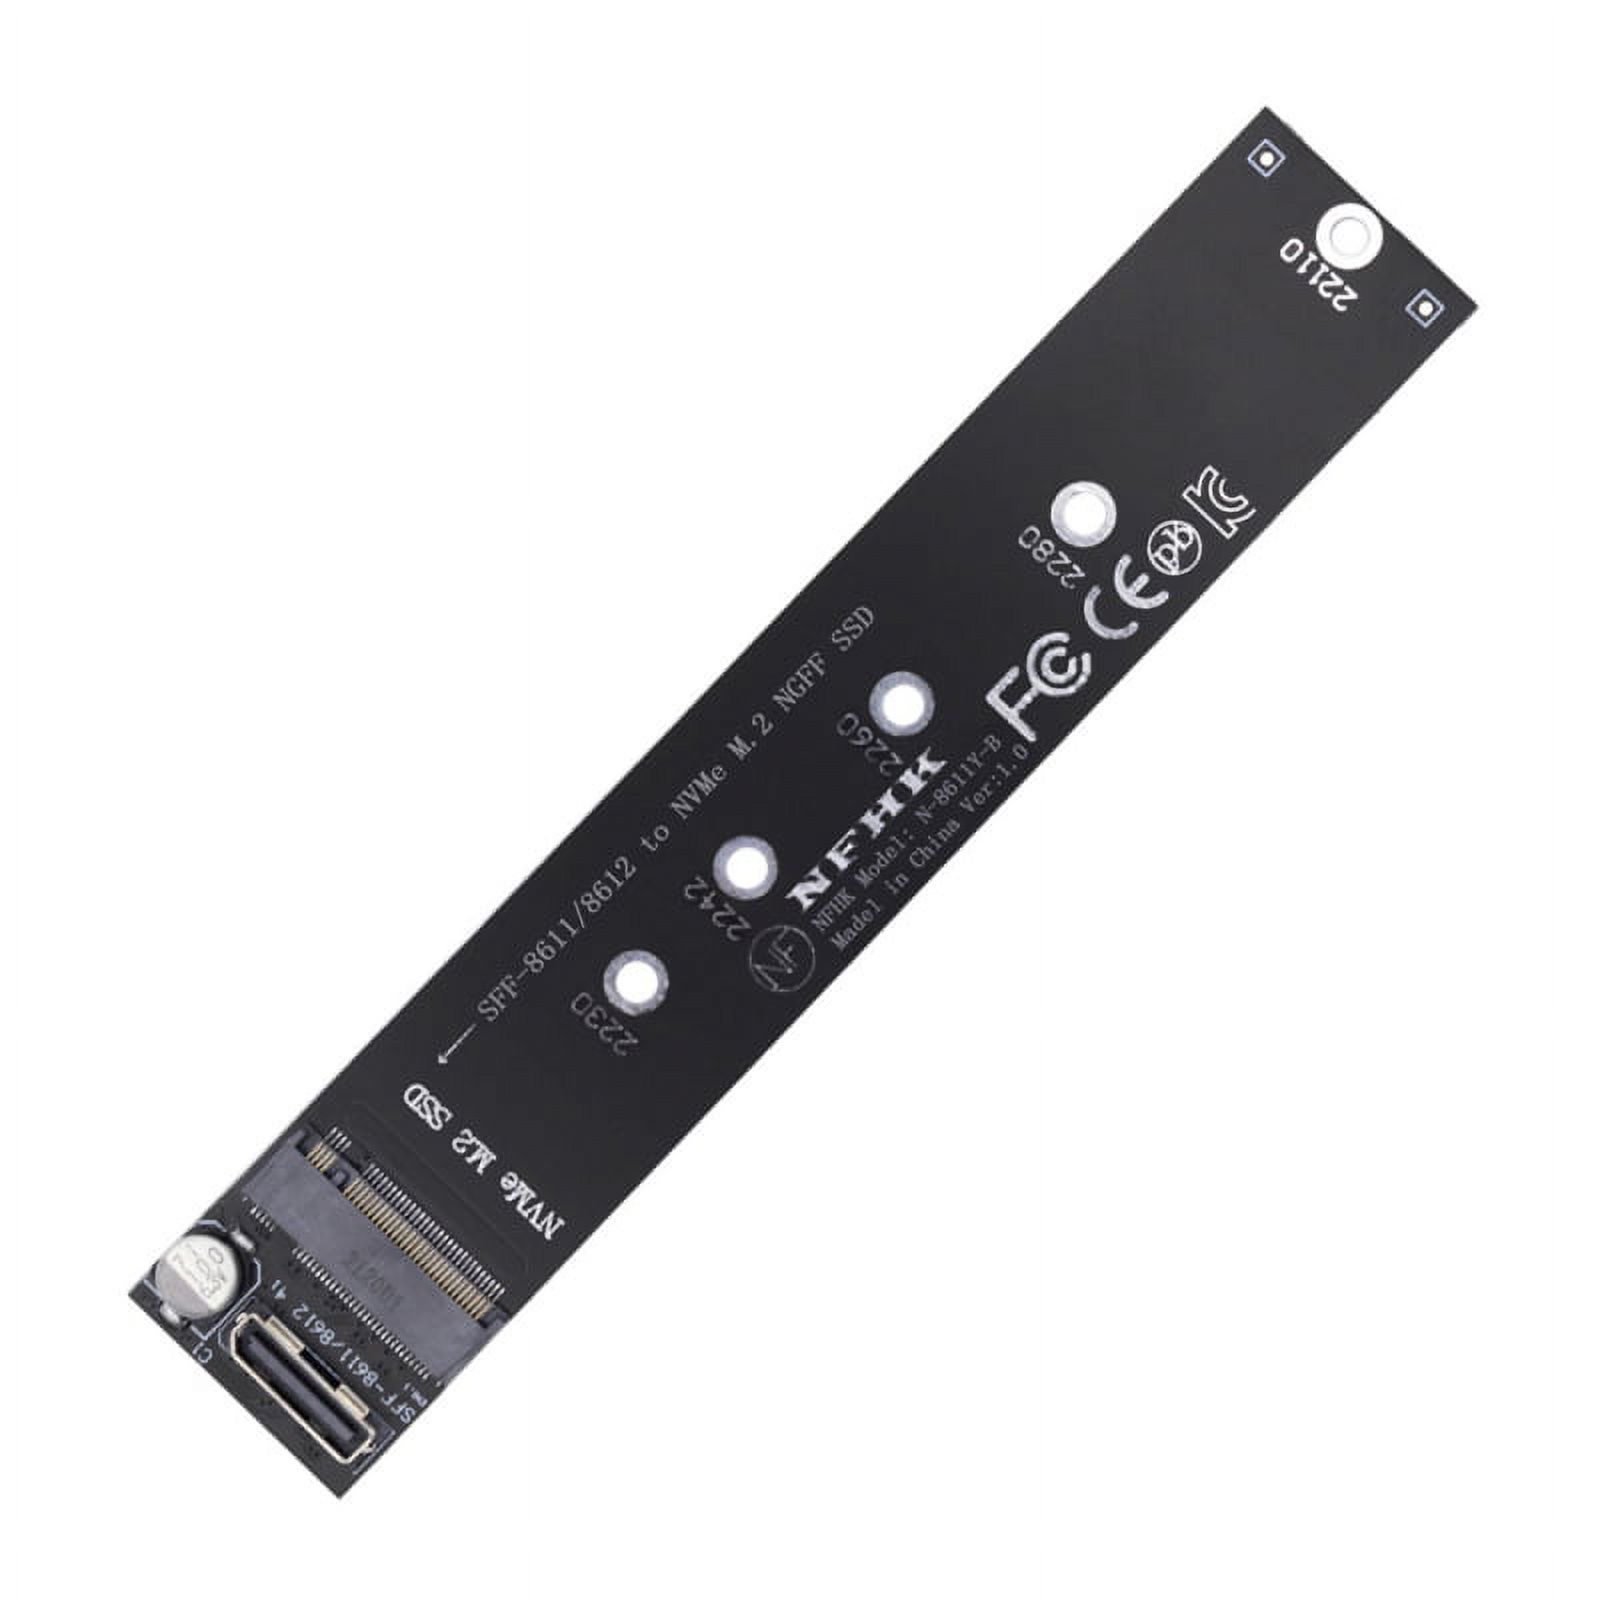 JSER Oculink SFF-8612 SFF-8611 to M.2 Kit NGFF M-Key to NVME PCIe SSD 2280 22110mm Adapter for Mainboard - image 1 of 7